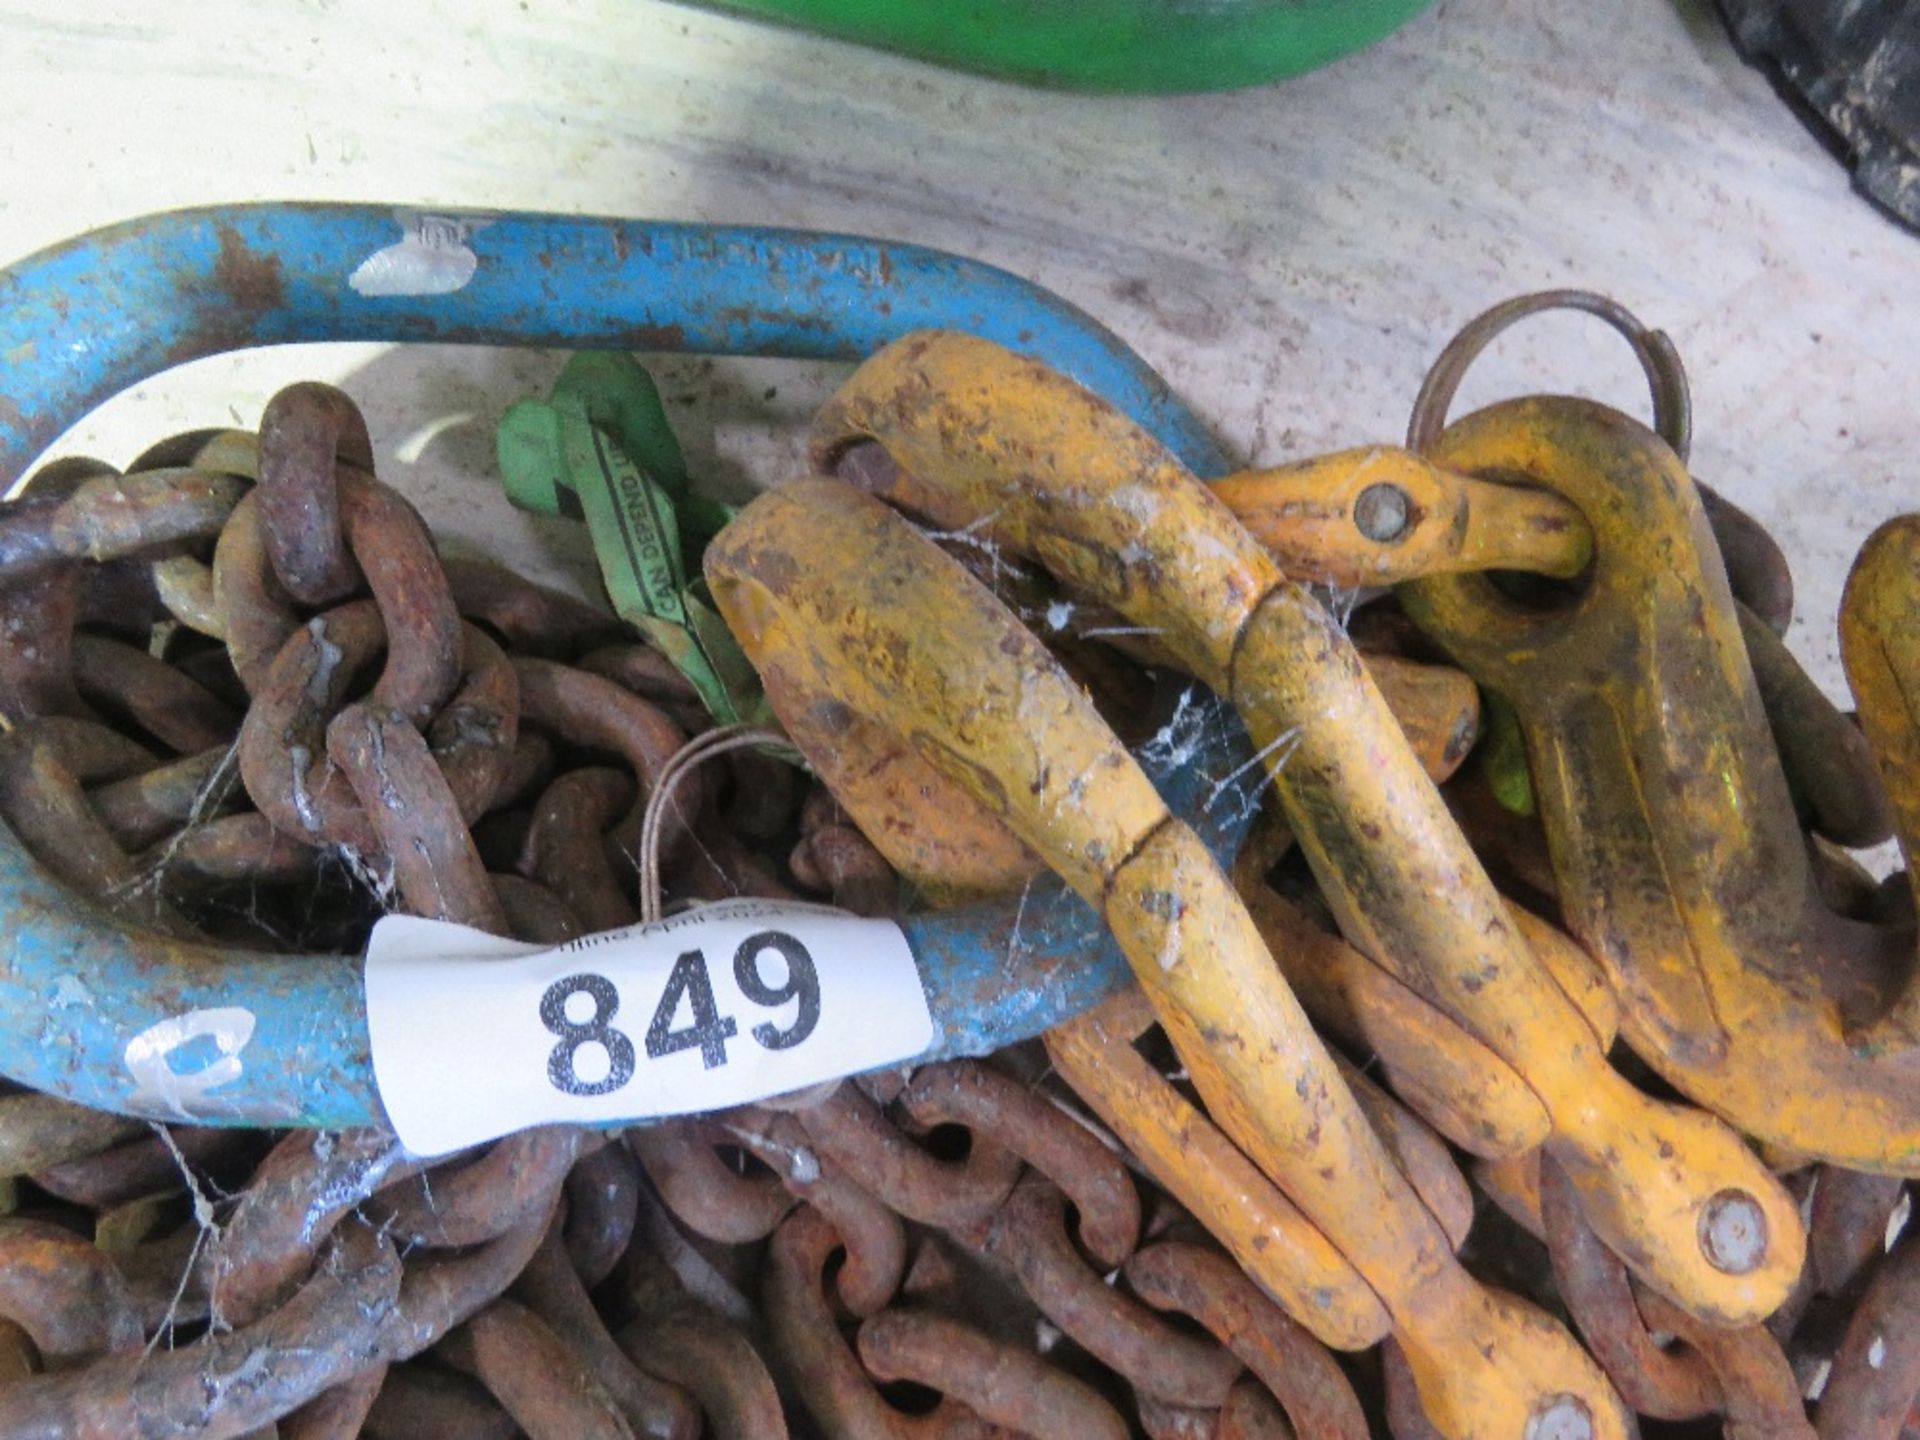 SET OF 2 LEGGED LIFING CHAINS WITH SHORTENERS, 8FT LENGTH APPROX. - Image 3 of 3